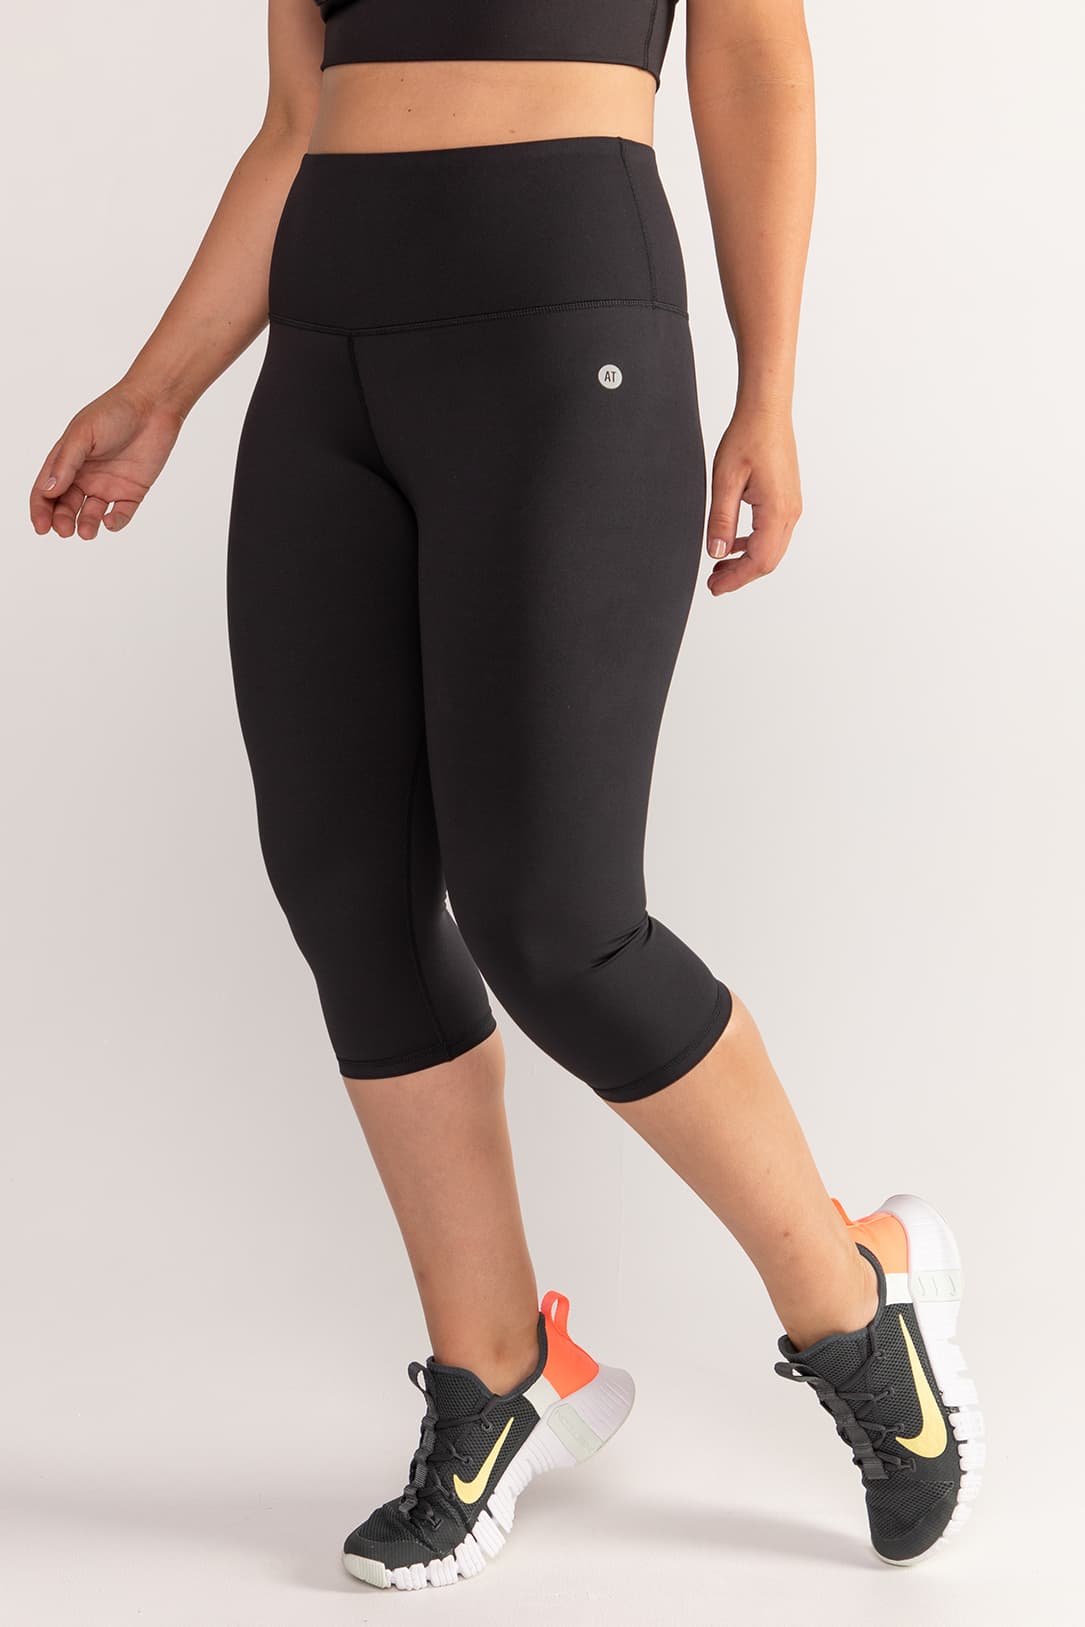 Buy DIAZ Women's 3/4 Length Leggings I 3/4 Yoga Pants for Women|High Waist  Gym, Running, Yogawear, Stretchable Capri for Women with Two Side Pockets  Size M Colour Black Online at Best Prices